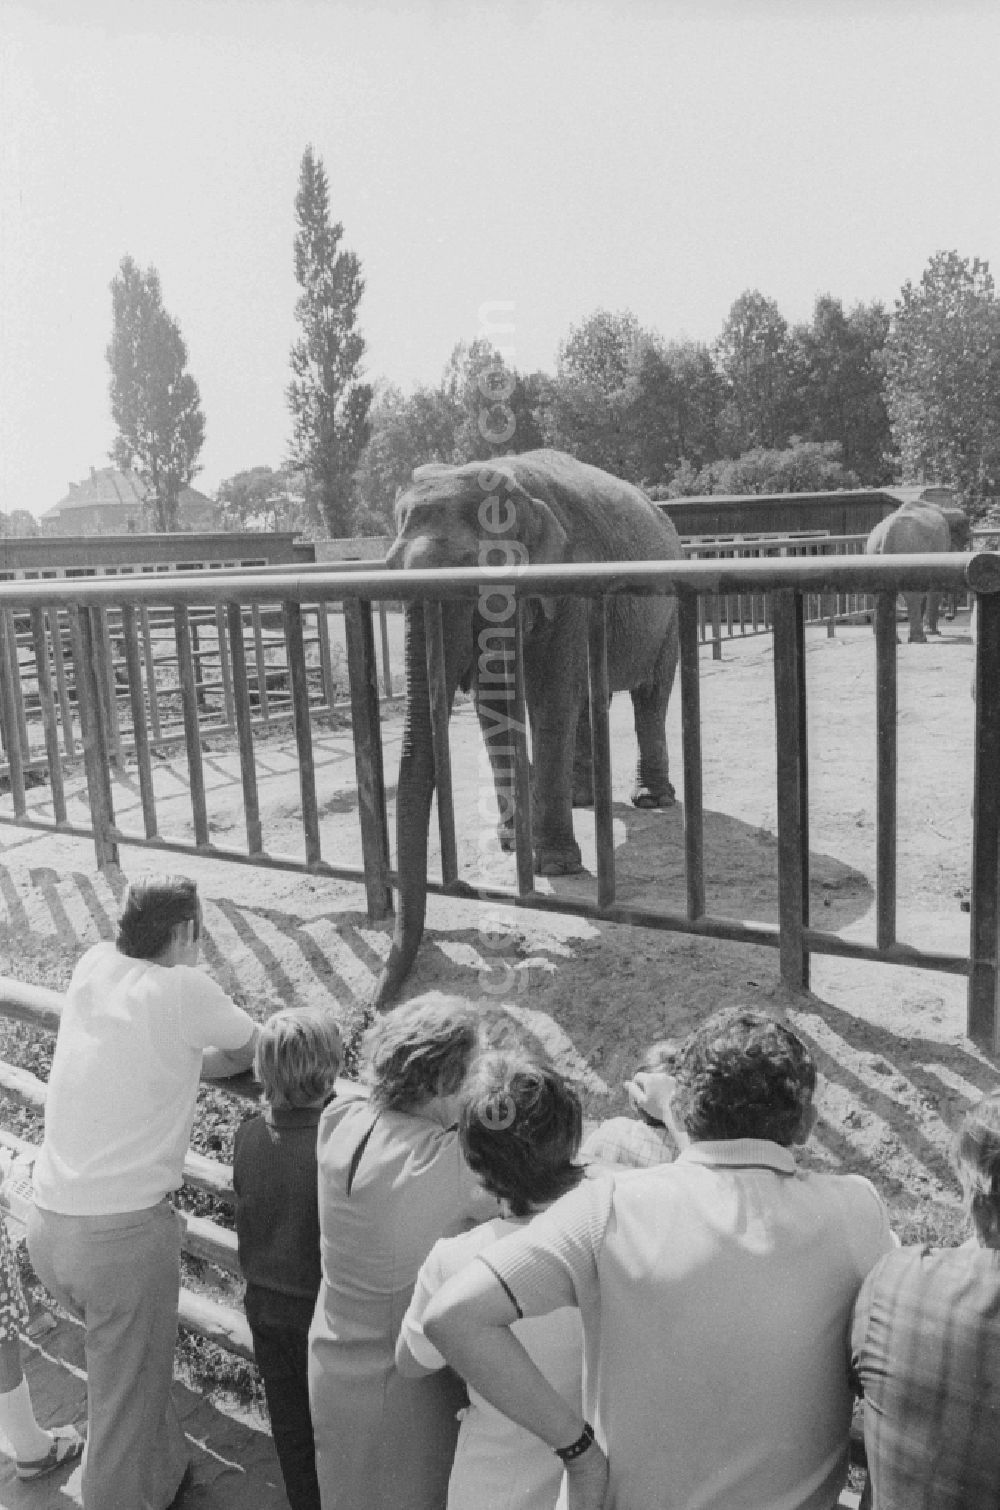 GDR image archive: Berlin - Visitors in the Tierpark Berlin at the elephant enclosure in Berlin, the former capital of the GDR, the German Democratic Republic